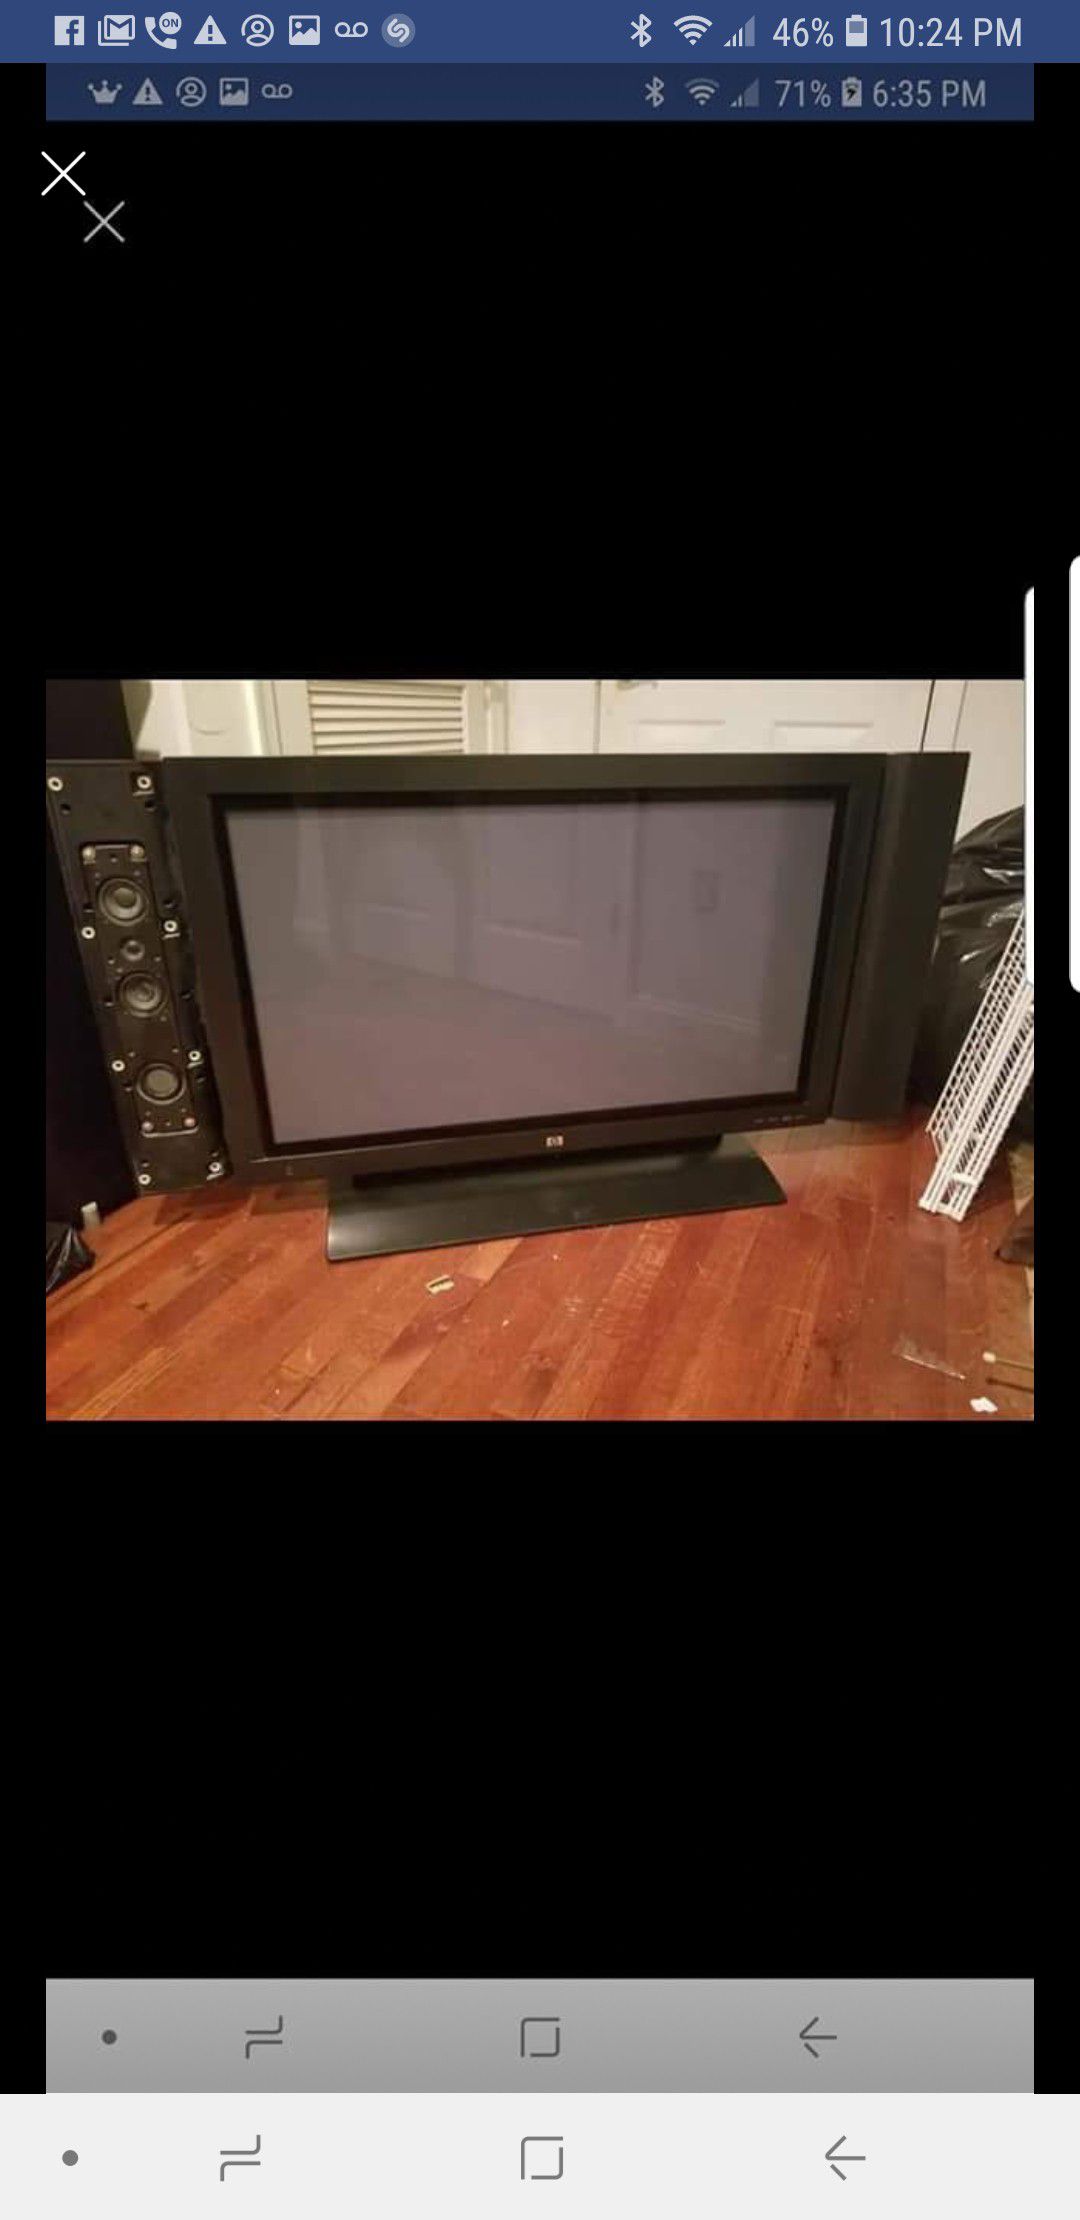 Hp 42 inch tv no remote. Missing side panel from speaker